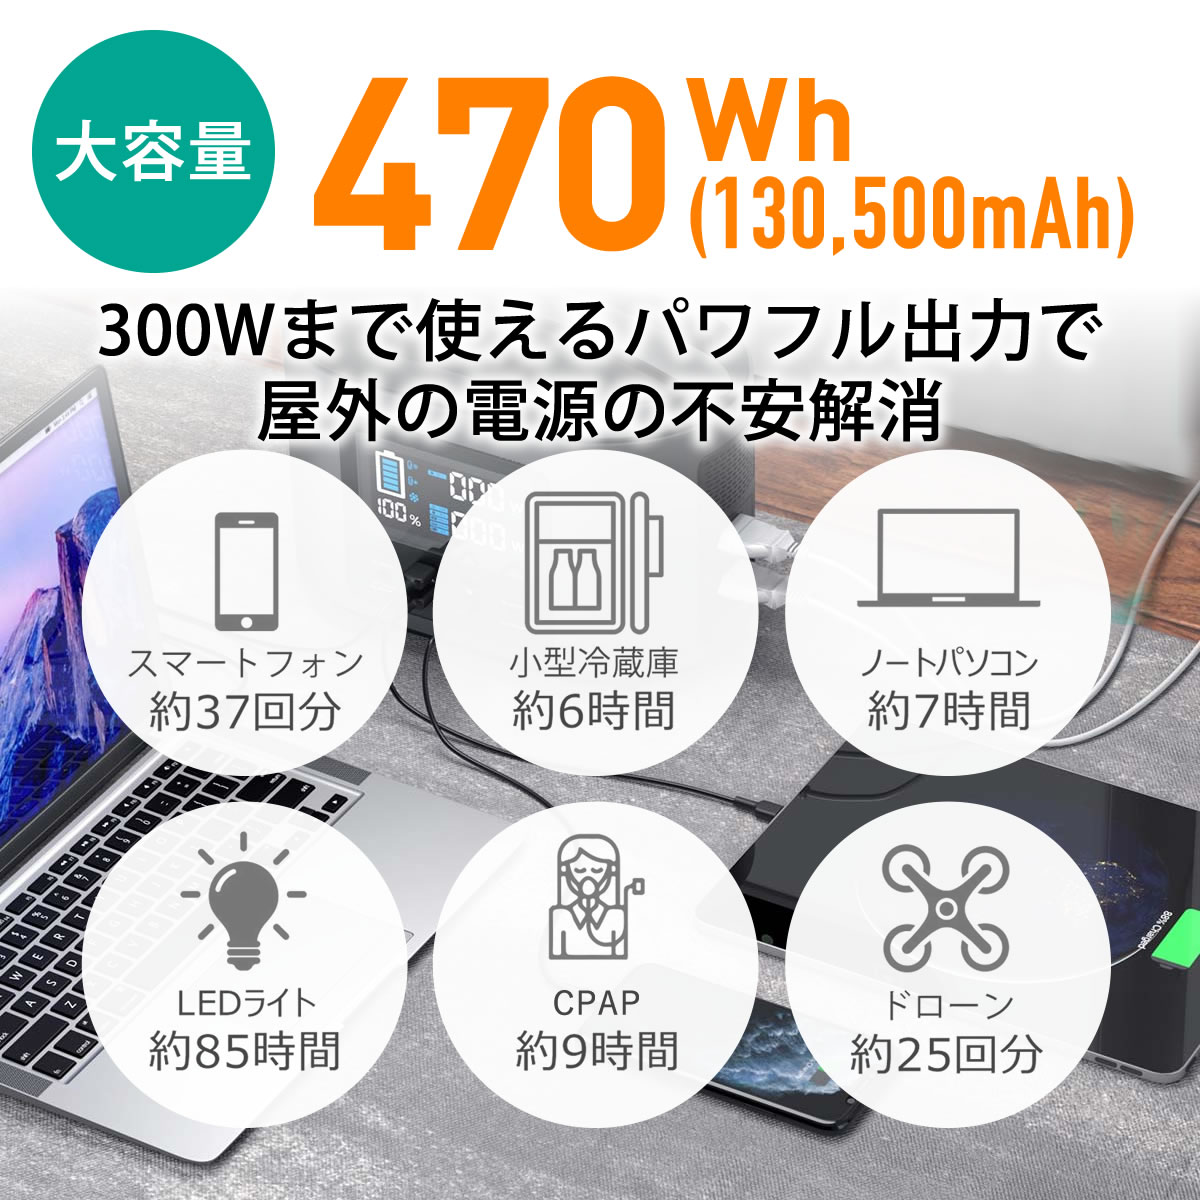 AUKEY 470Wh ポータブル電源 PS-ST04